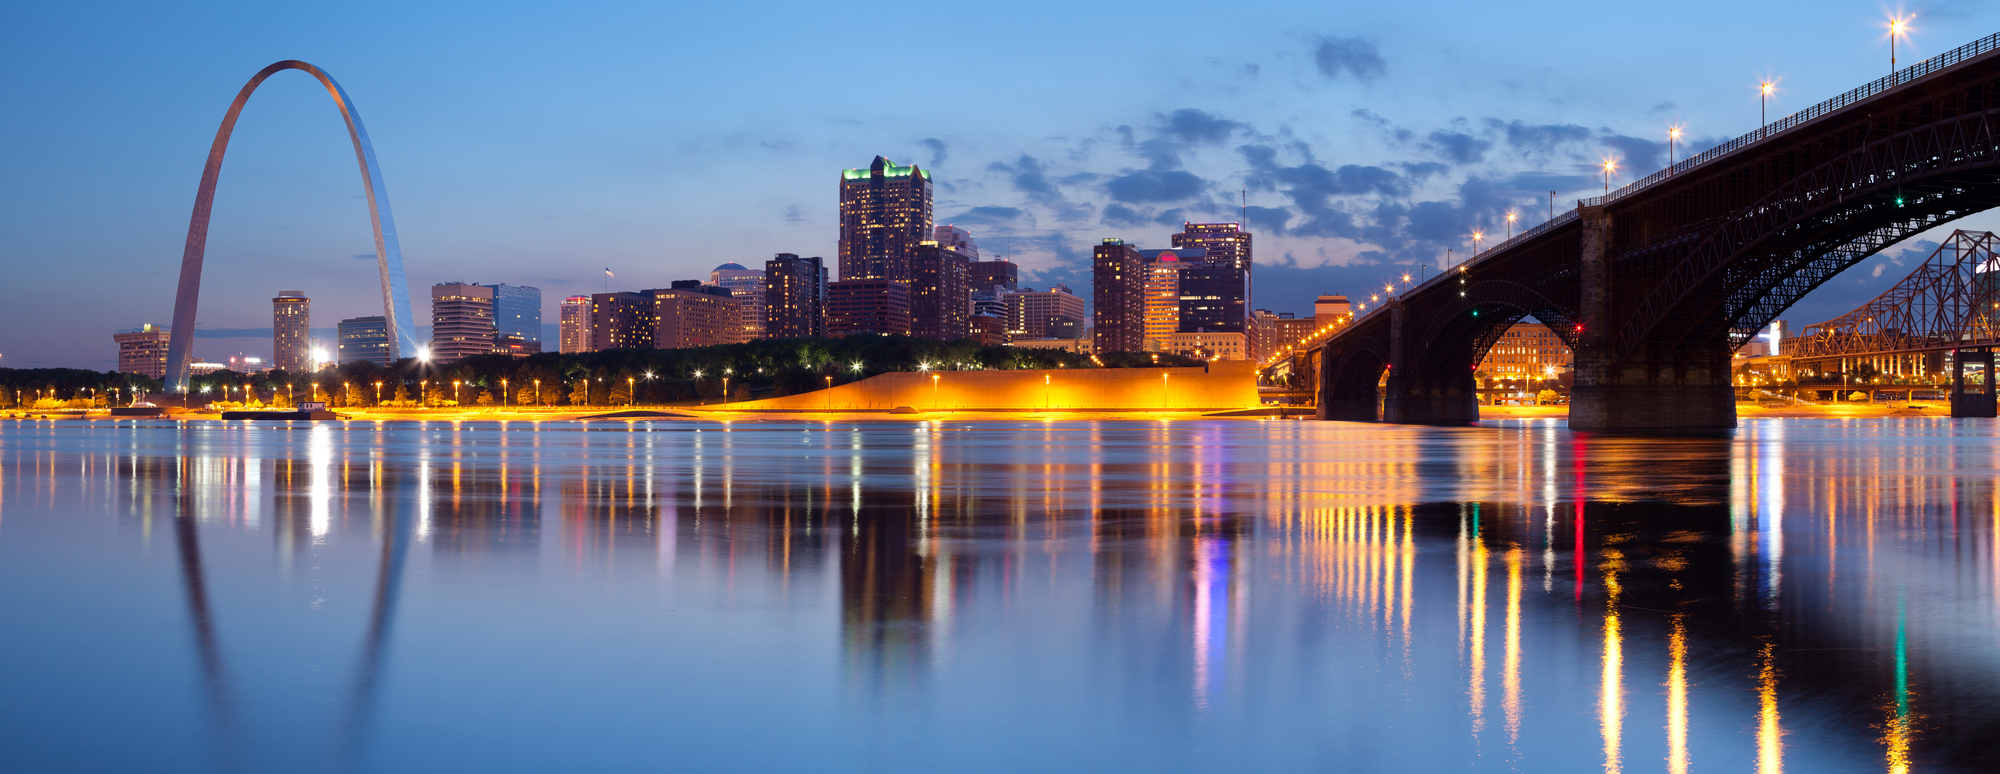 Panoramic photo of St Louis arch from the Mississippi River at dusk